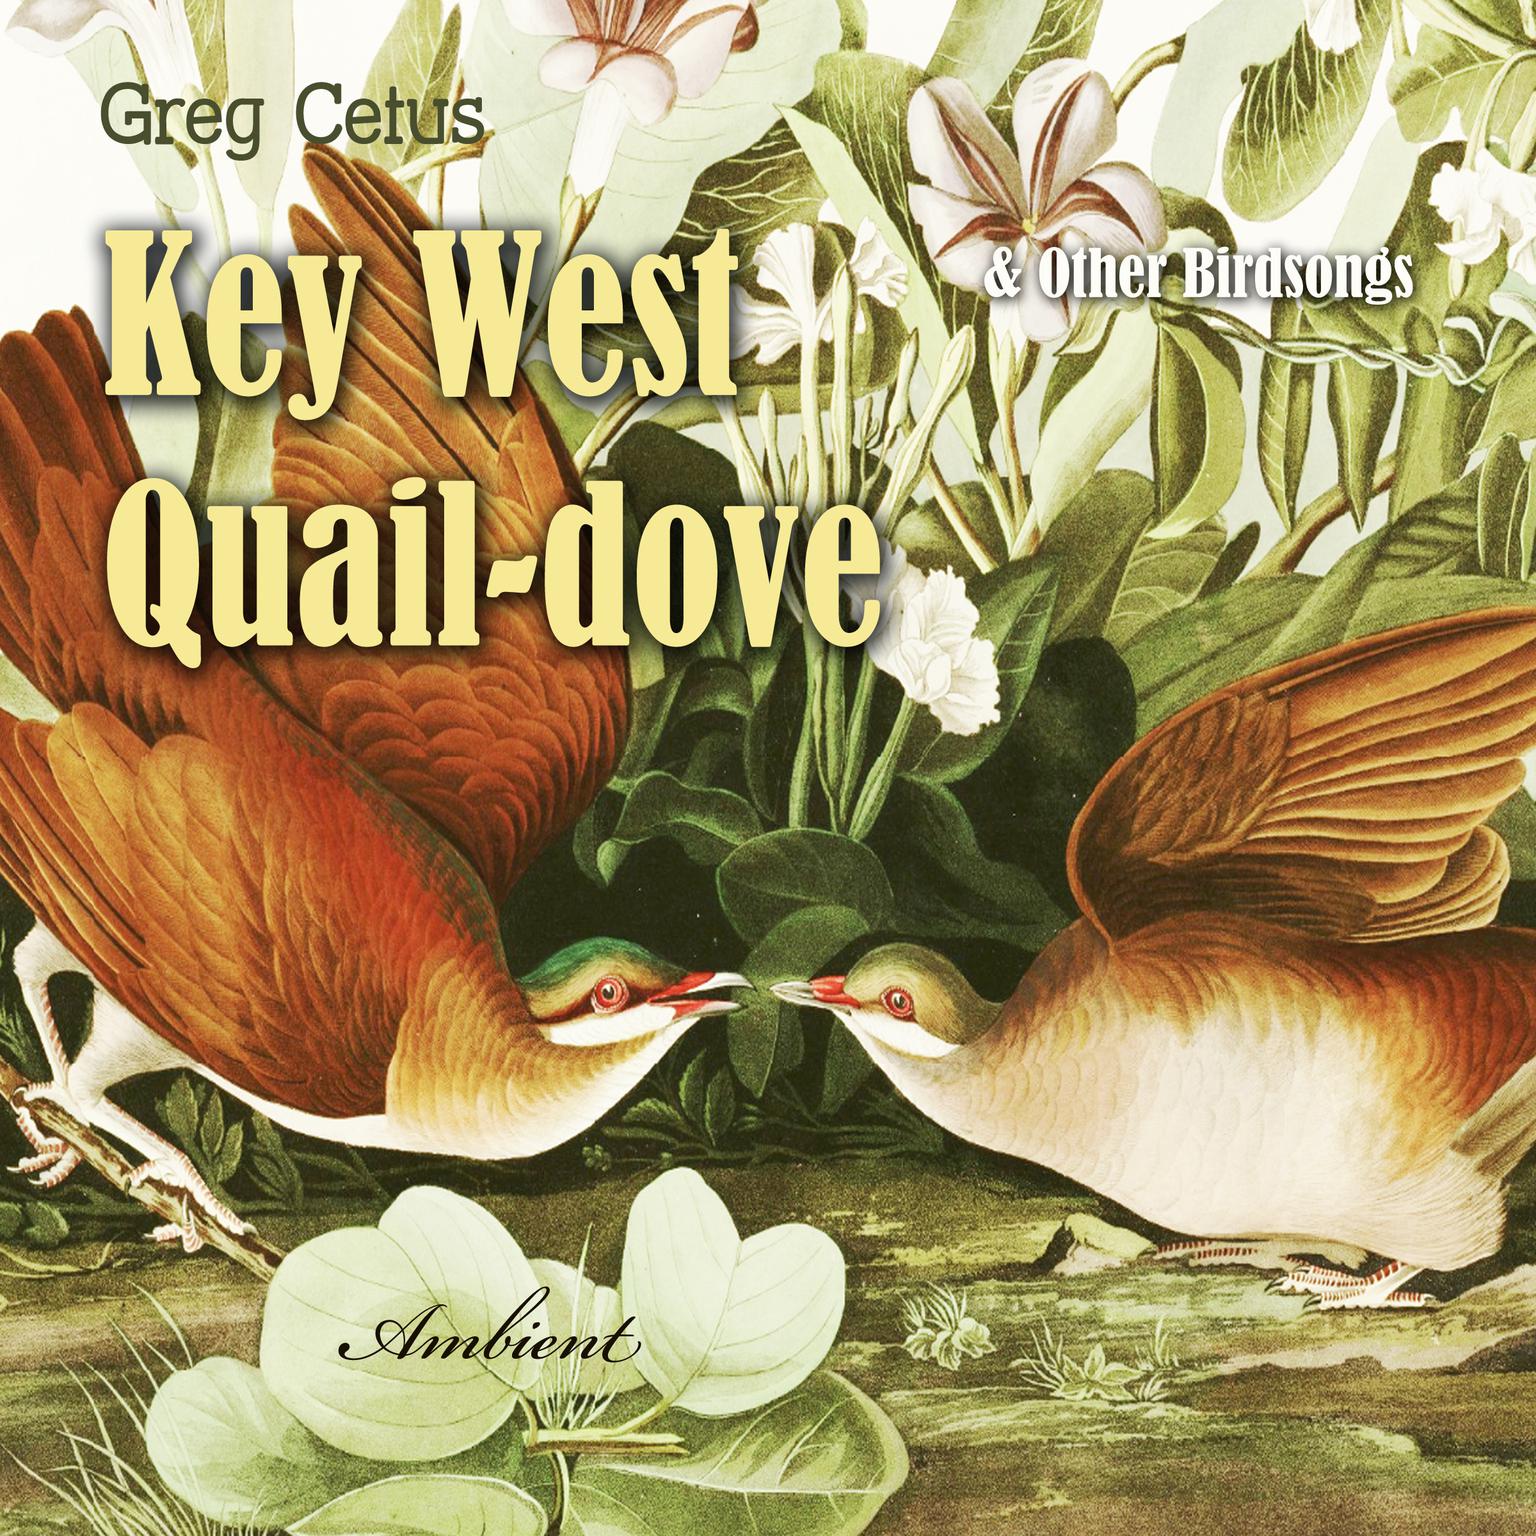 Key West Quail-dove and Other Birdsongs Audiobook, by Greg Cetus